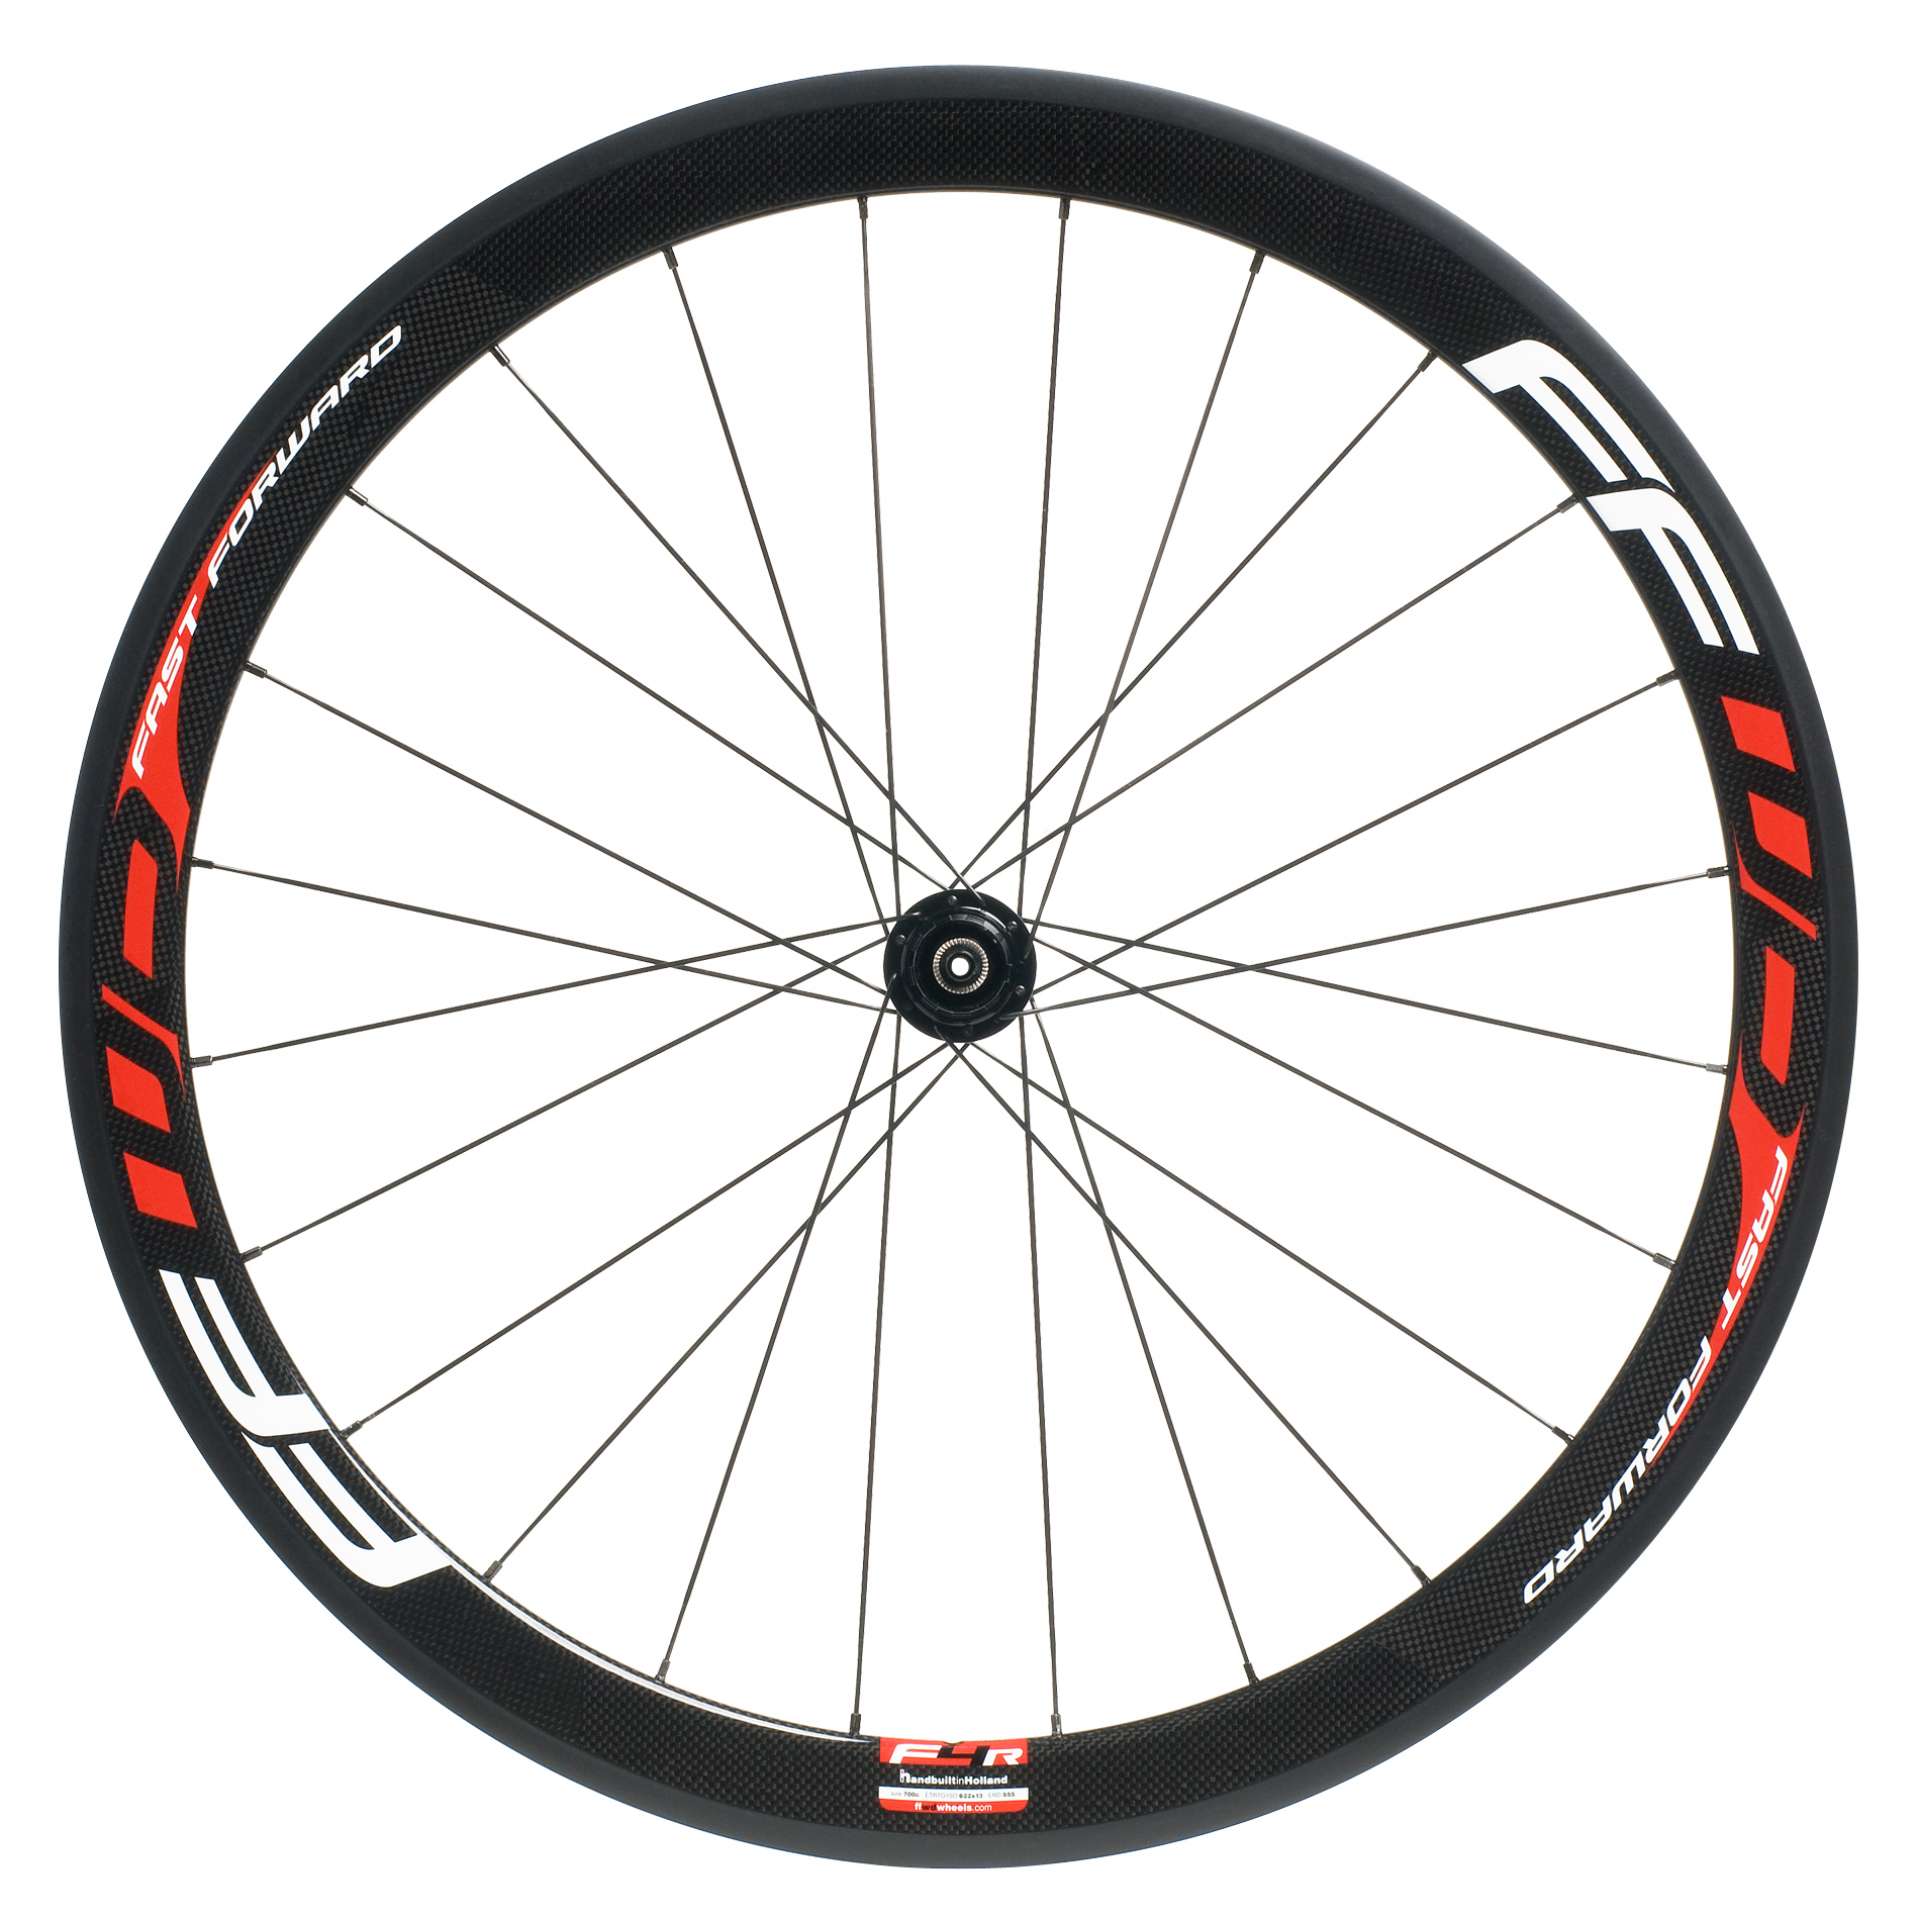 Fast Forward F4R Carbon Clincher Wielset met DT Swiss 240S Naaf Rood